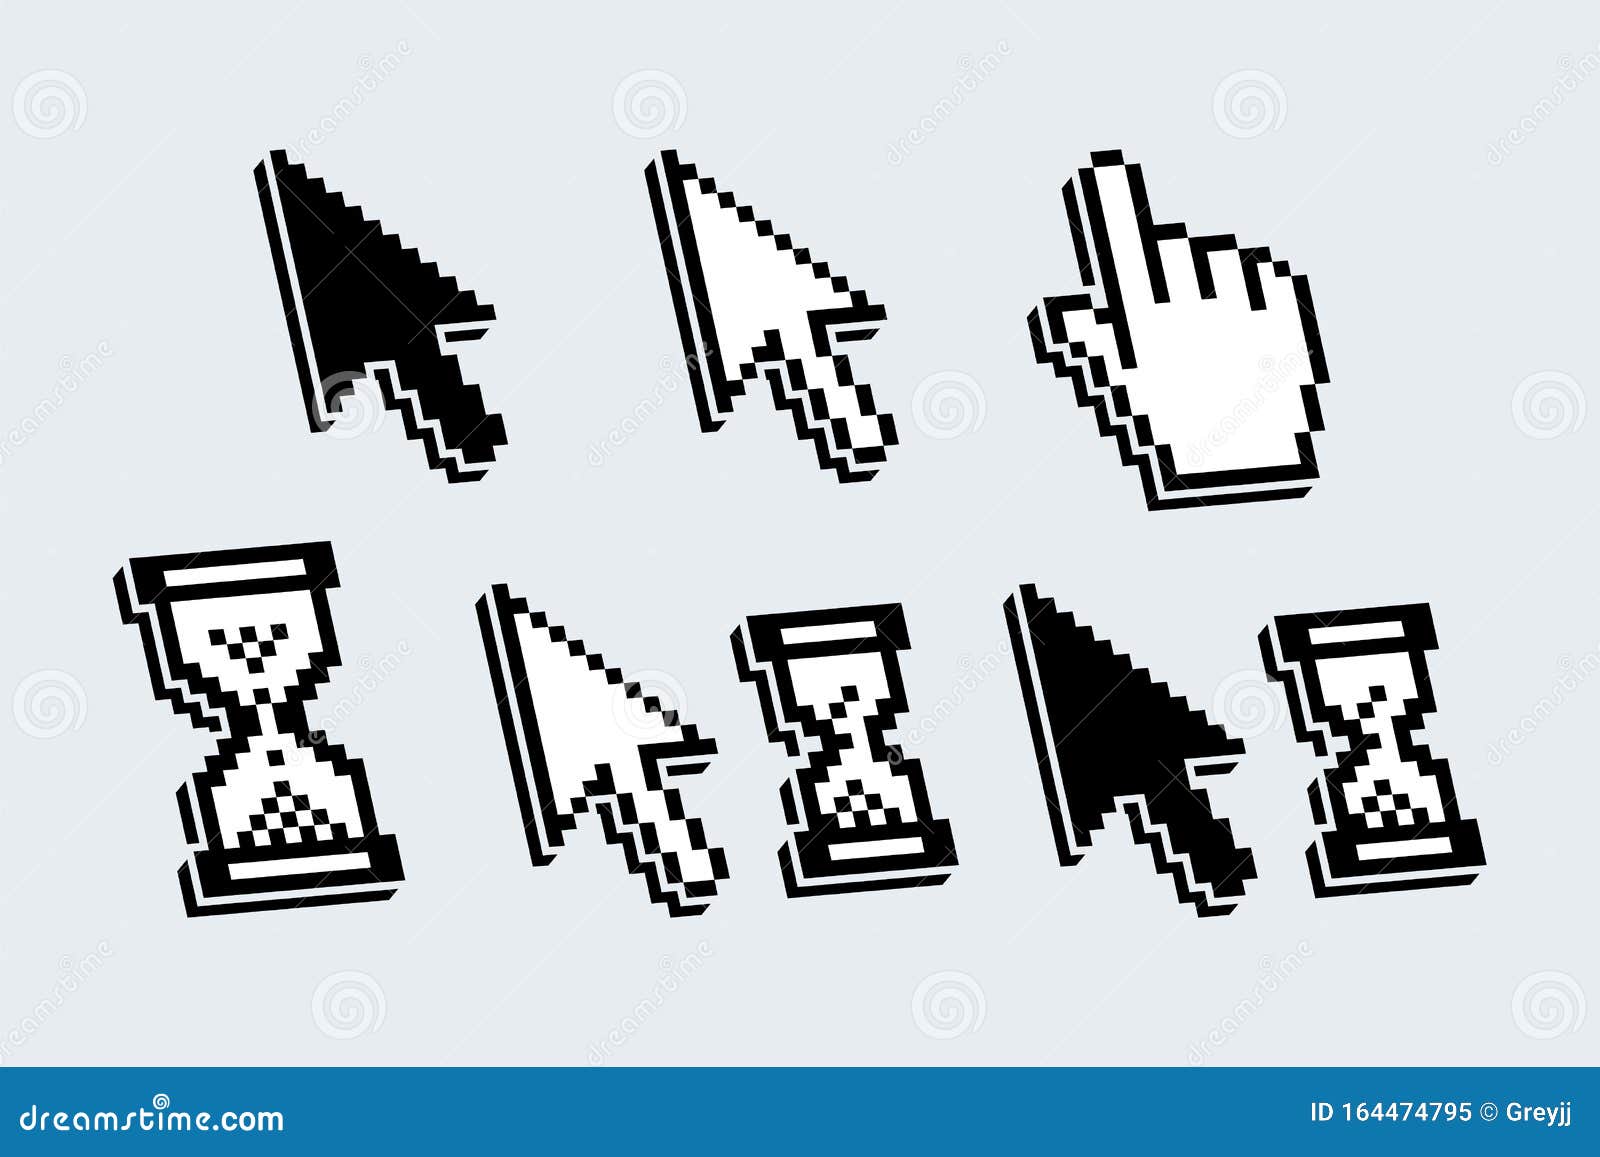 set of  pixelated cursors, pointers